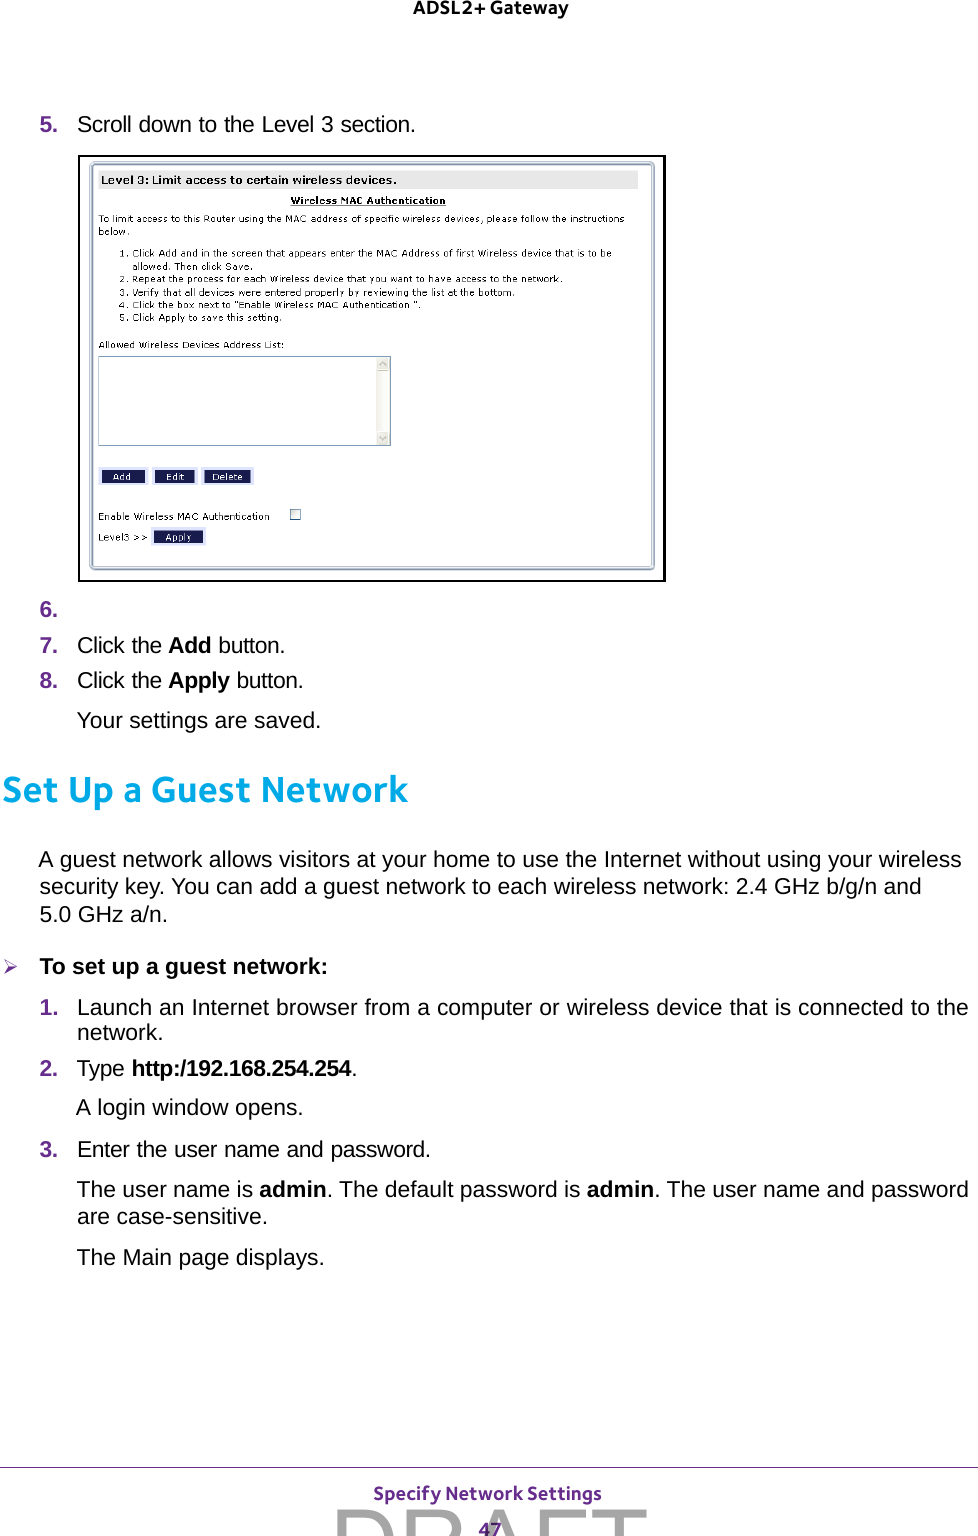 Specify Network Settings 47 ADSL2+ Gateway5.  Scroll down to the Level 3 section.6. 7.  Click the Add button.8.  Click the Apply button.Your settings are saved.Set Up a Guest NetworkA guest network allows visitors at your home to use the Internet without using your wireless security key. You can add a guest network to each wireless network: 2.4 GHz b/g/n and  5.0 GHz a/n. To set up a guest network:1.  Launch an Internet browser from a computer or wireless device that is connected to the network.2.  Type http:/192.168.254.254.A login window opens.3.  Enter the user name and password.The user name is admin. The default password is admin. The user name and password are case-sensitive.The Main page displays.DRAFT